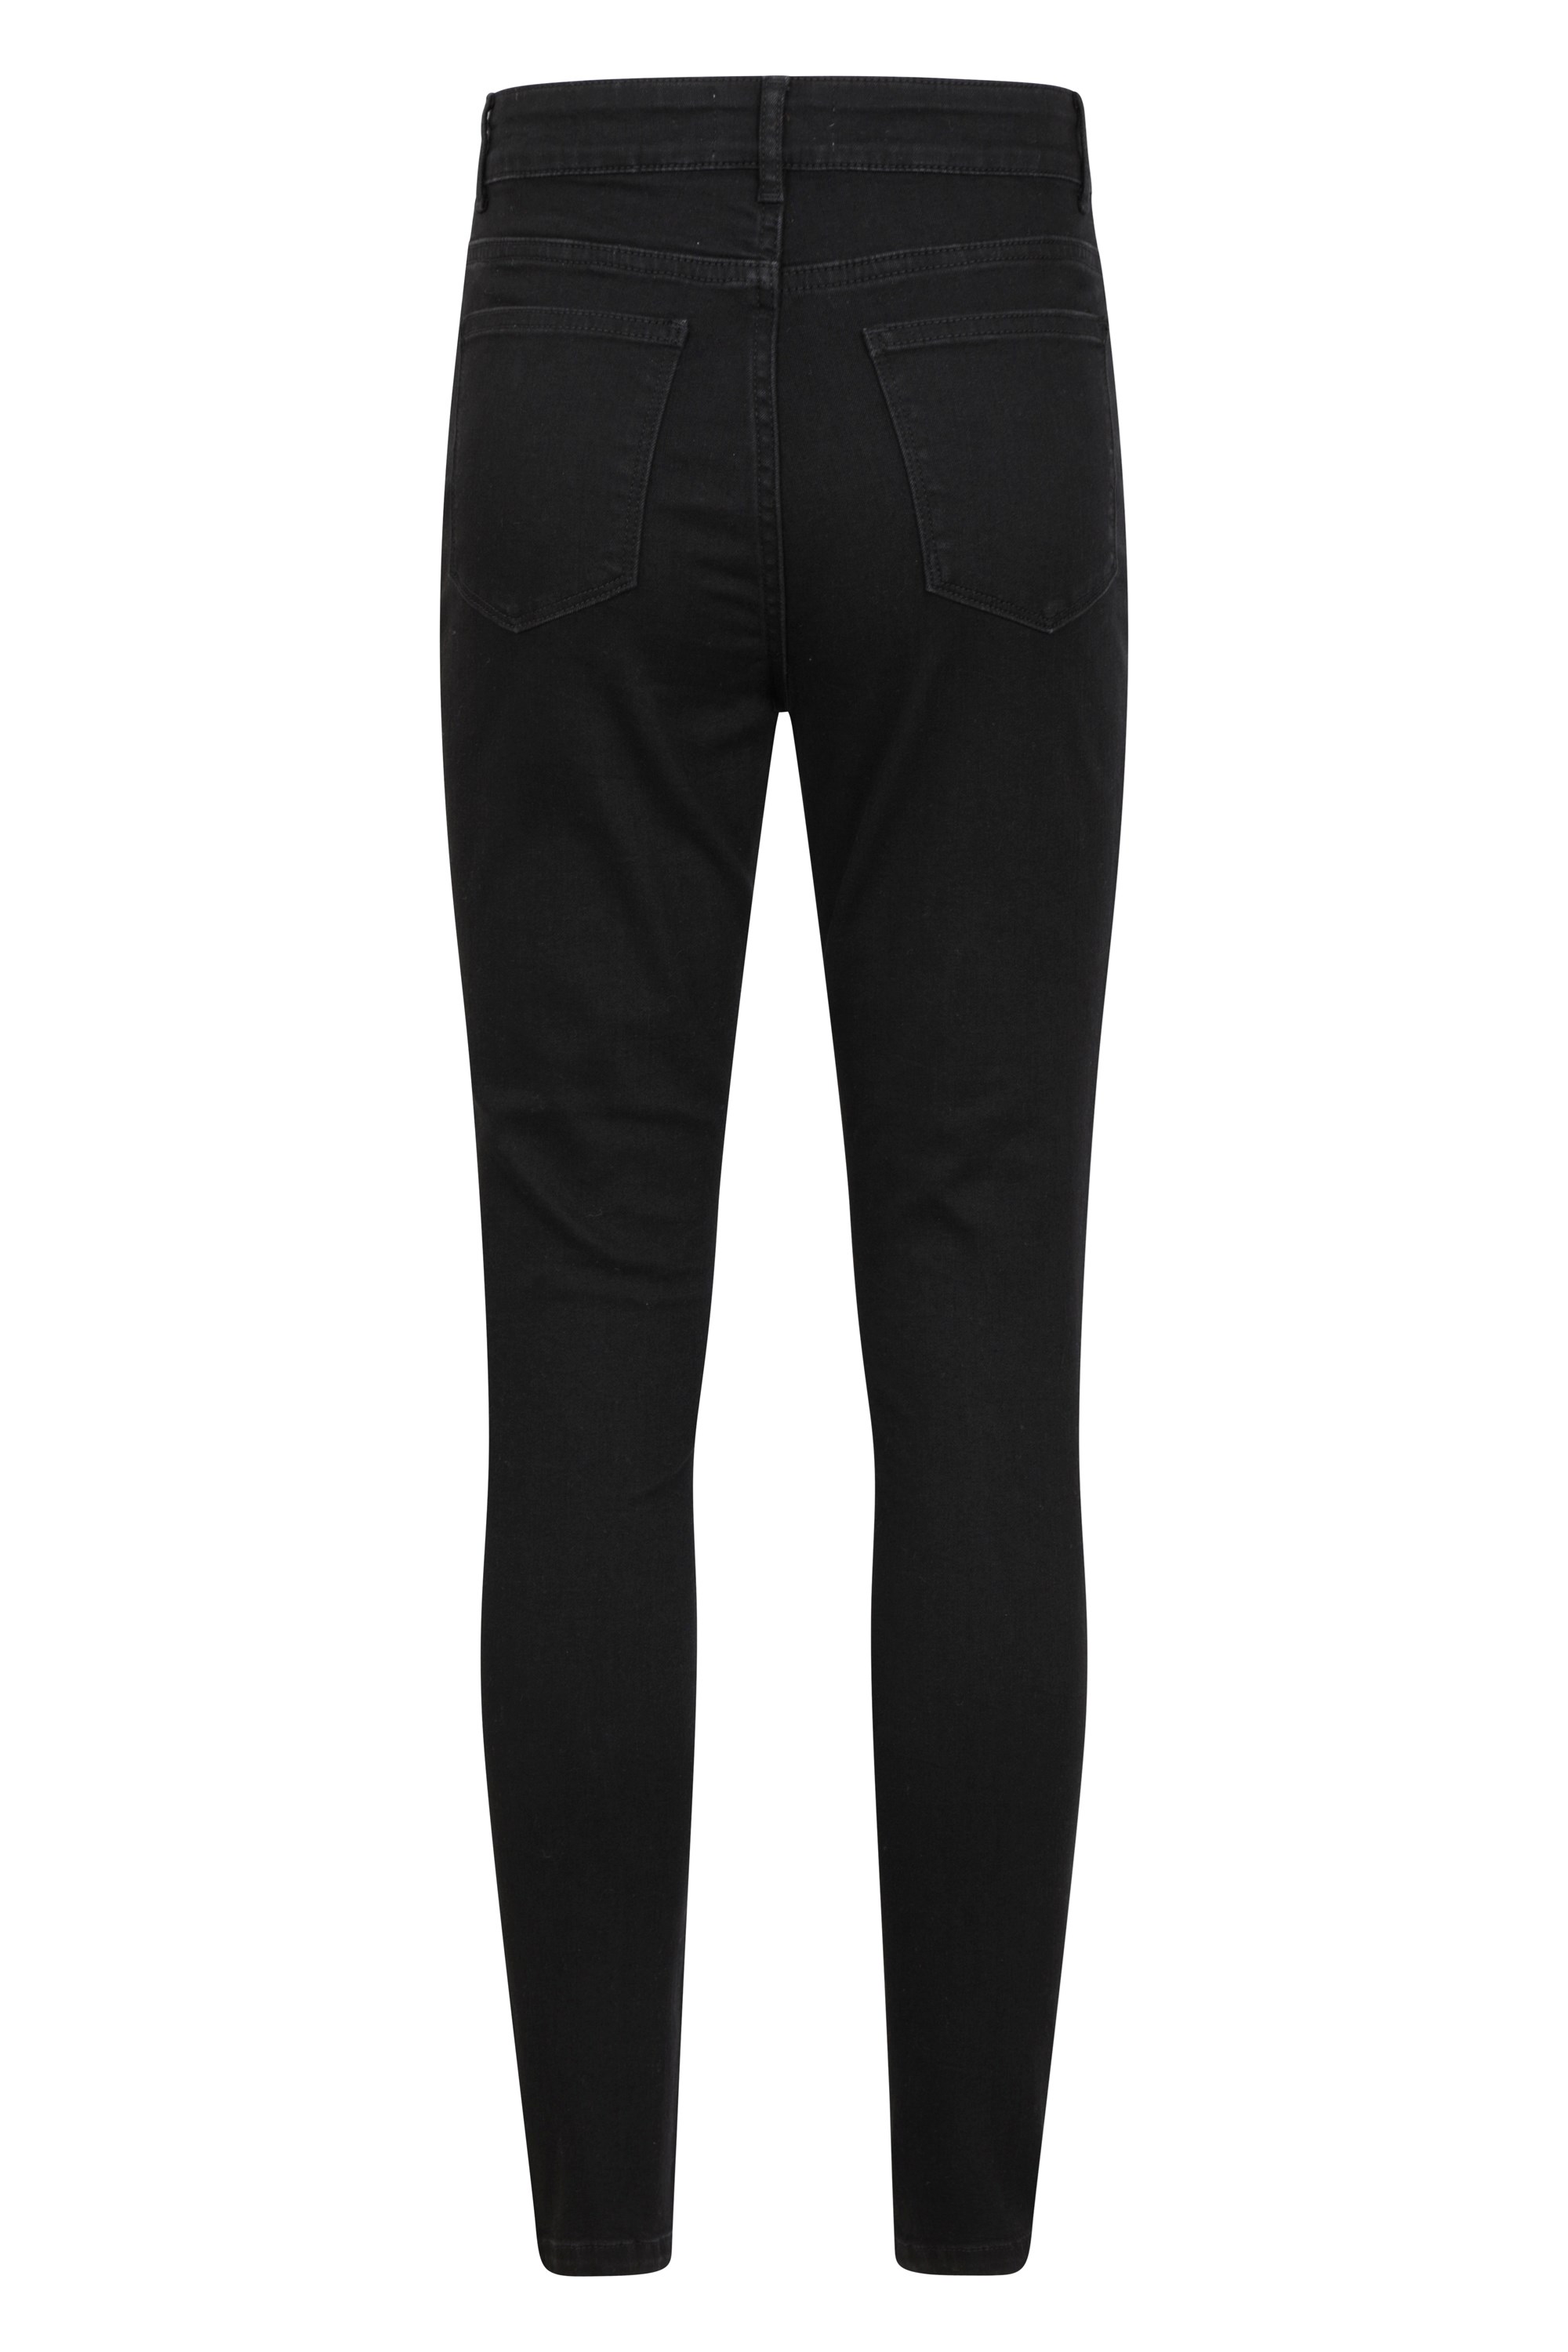 TIORU Jeans for Women Pants Women's Jeans Pants for wome Washed Skinny Jeans  Jeans (Color : Black, Size : 26) : : Clothing, Shoes & Accessories